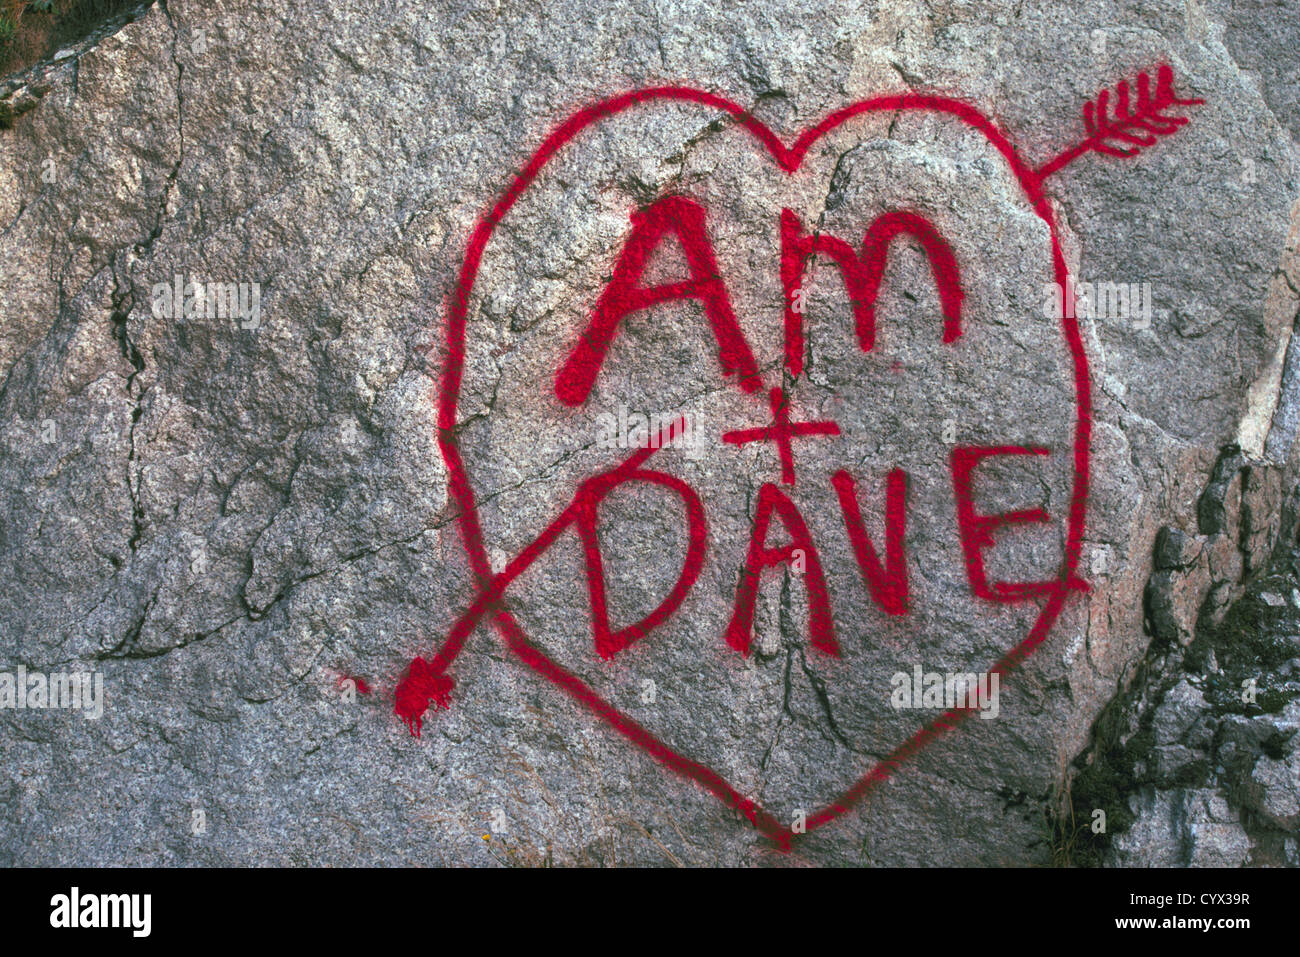 True Love Heart and Romance - Names and Initials written in Red Paint on a Rock - Heart-Shaped Romantic Graffiti Drawing Stock Photo